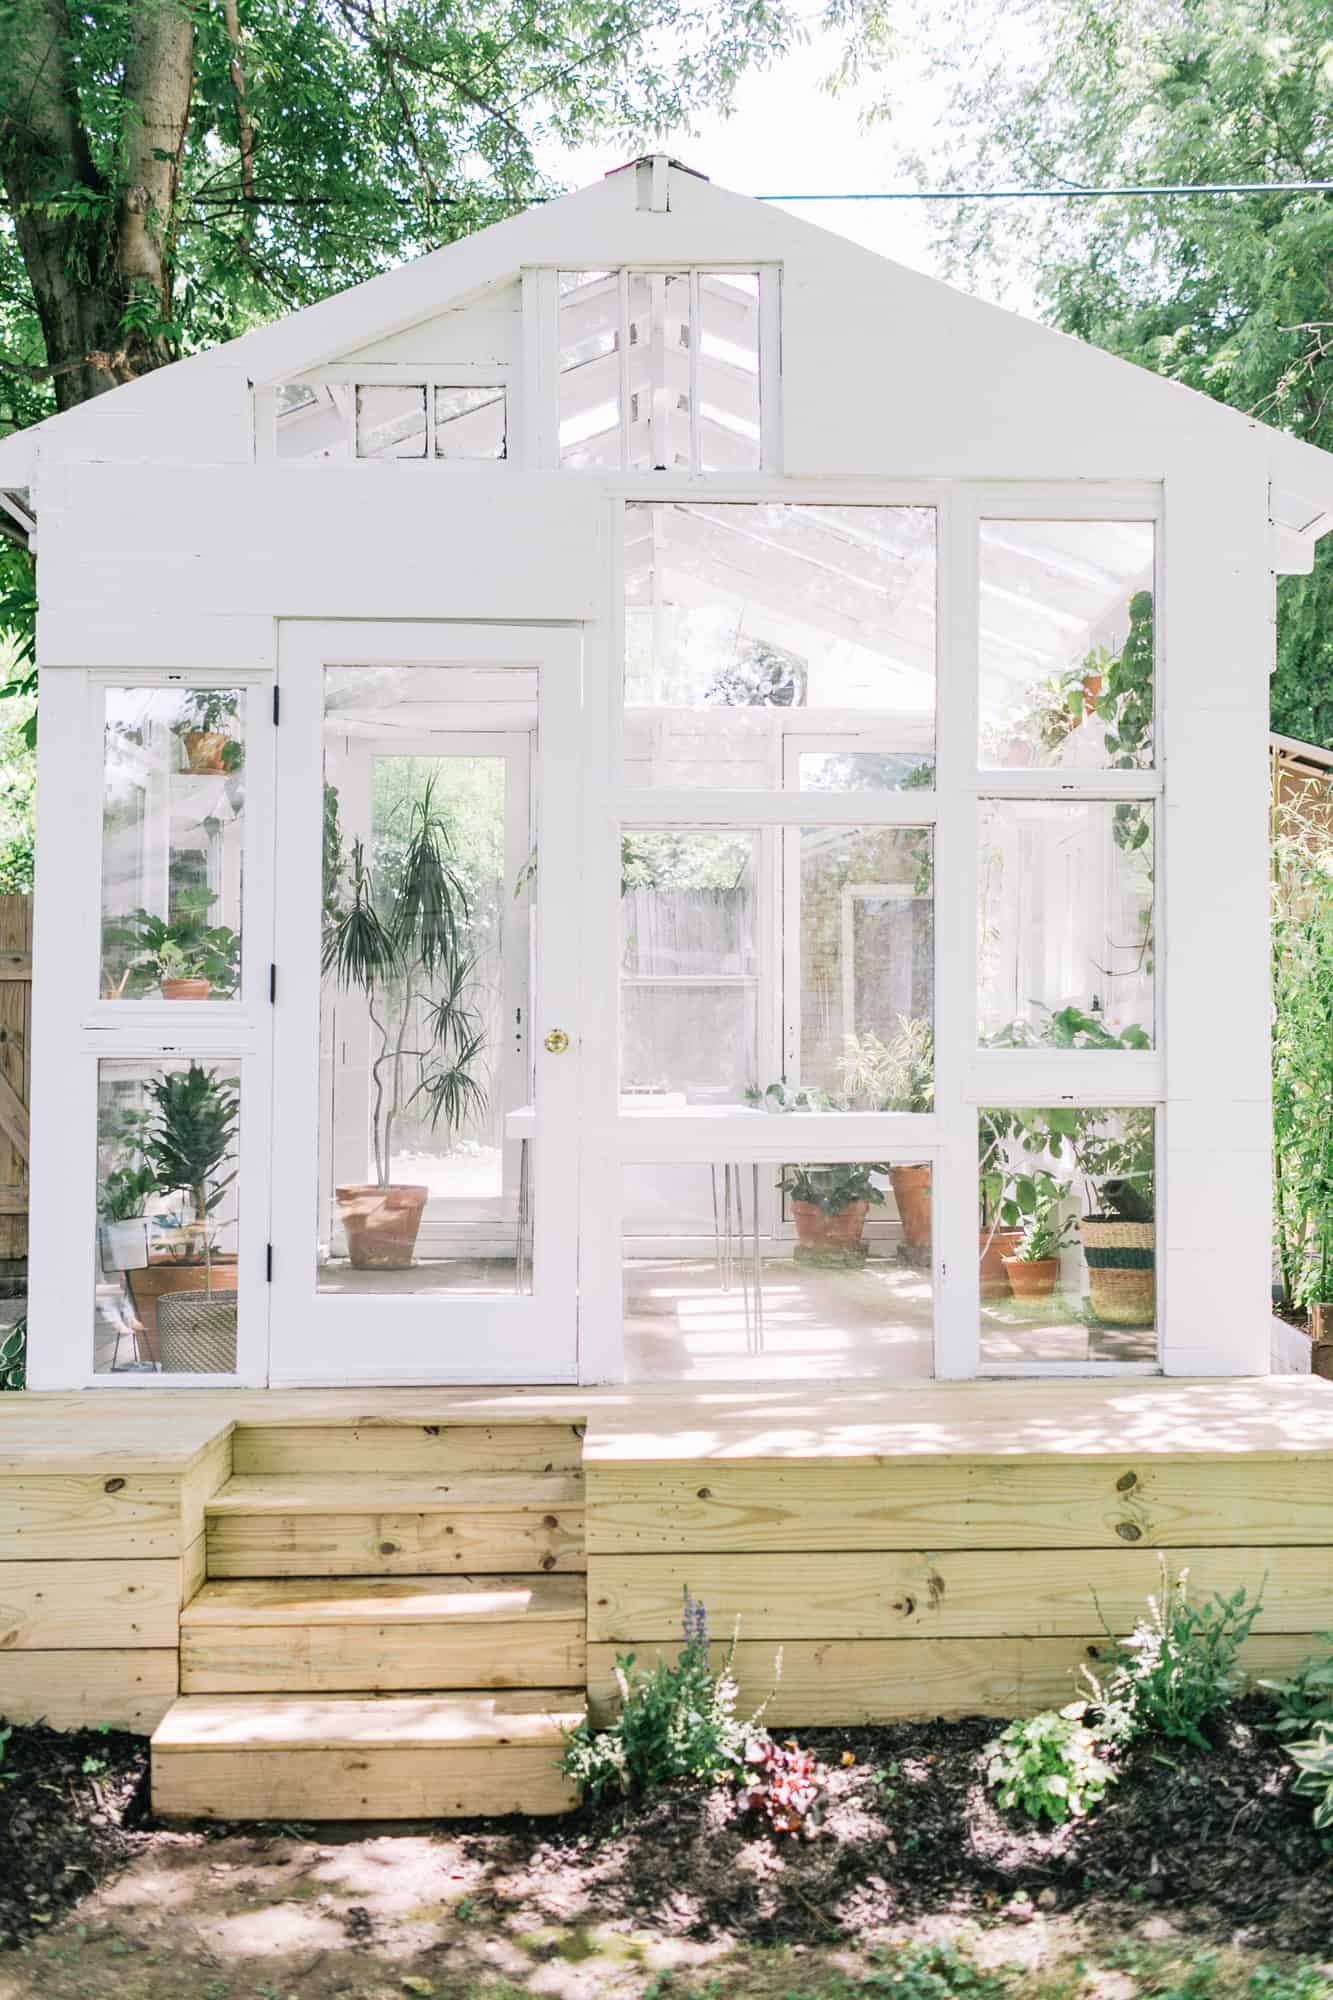 wooden frame of greenhouse painted white with windows and doors in it and wooden stairs leading up to it